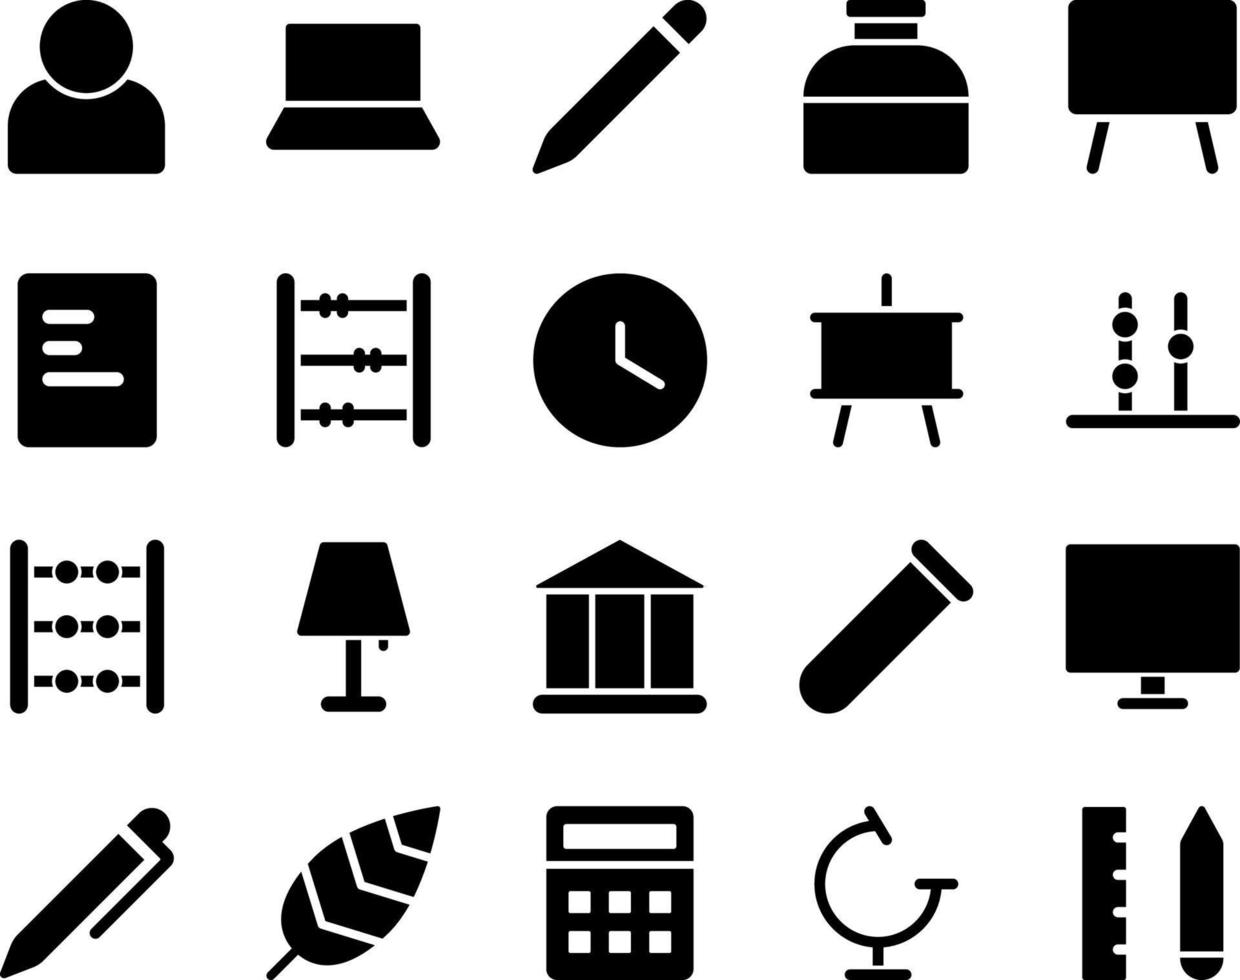 Drawing tools - Free education icons